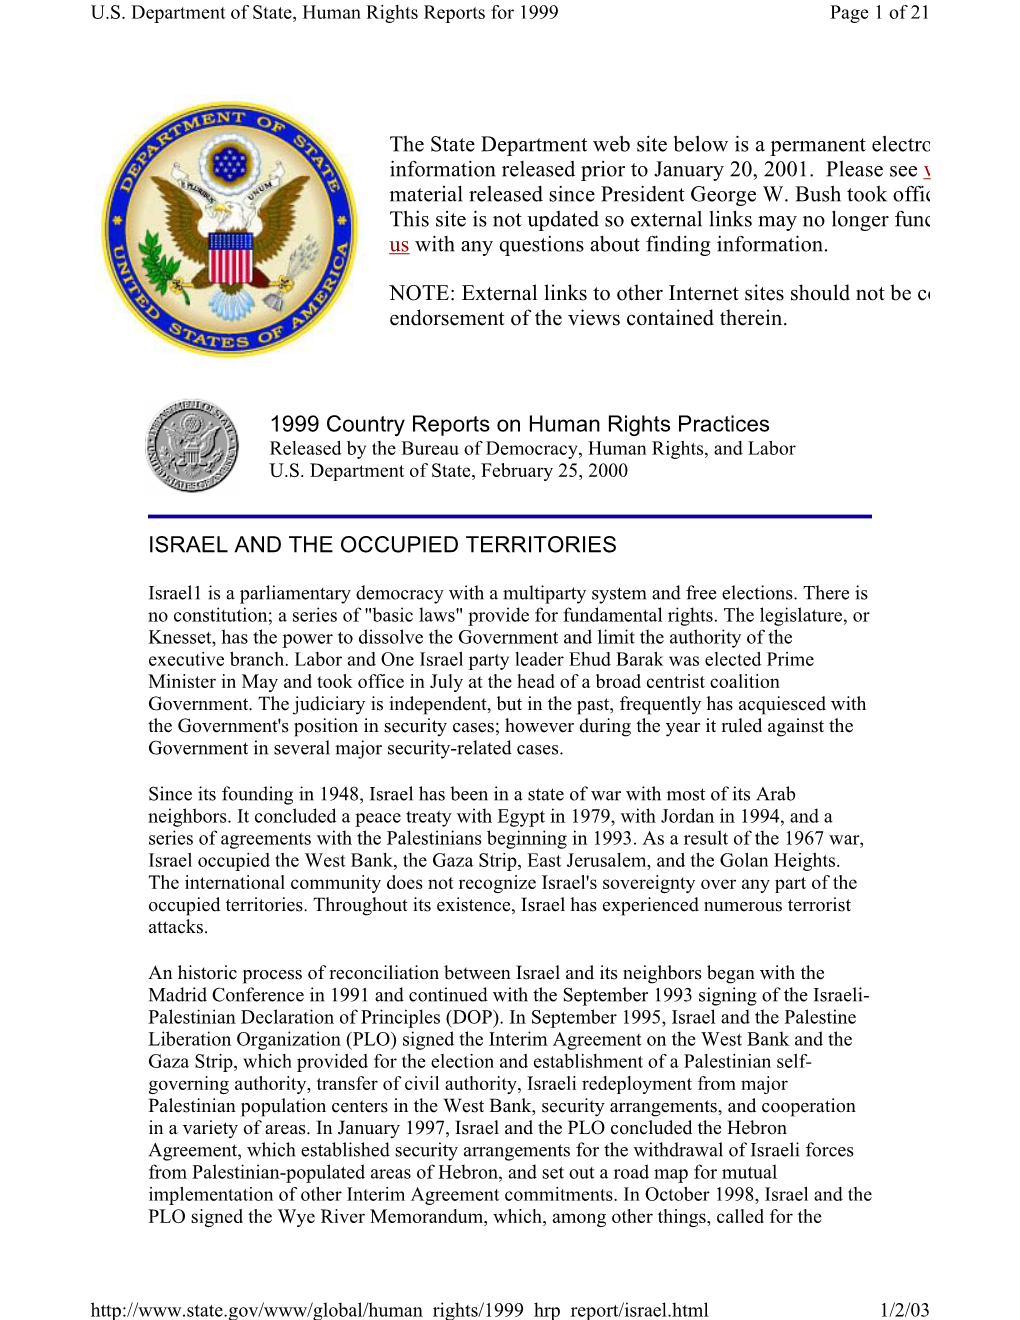 US Department of State, Human Rights Reports for 1999 Page 1 of 21